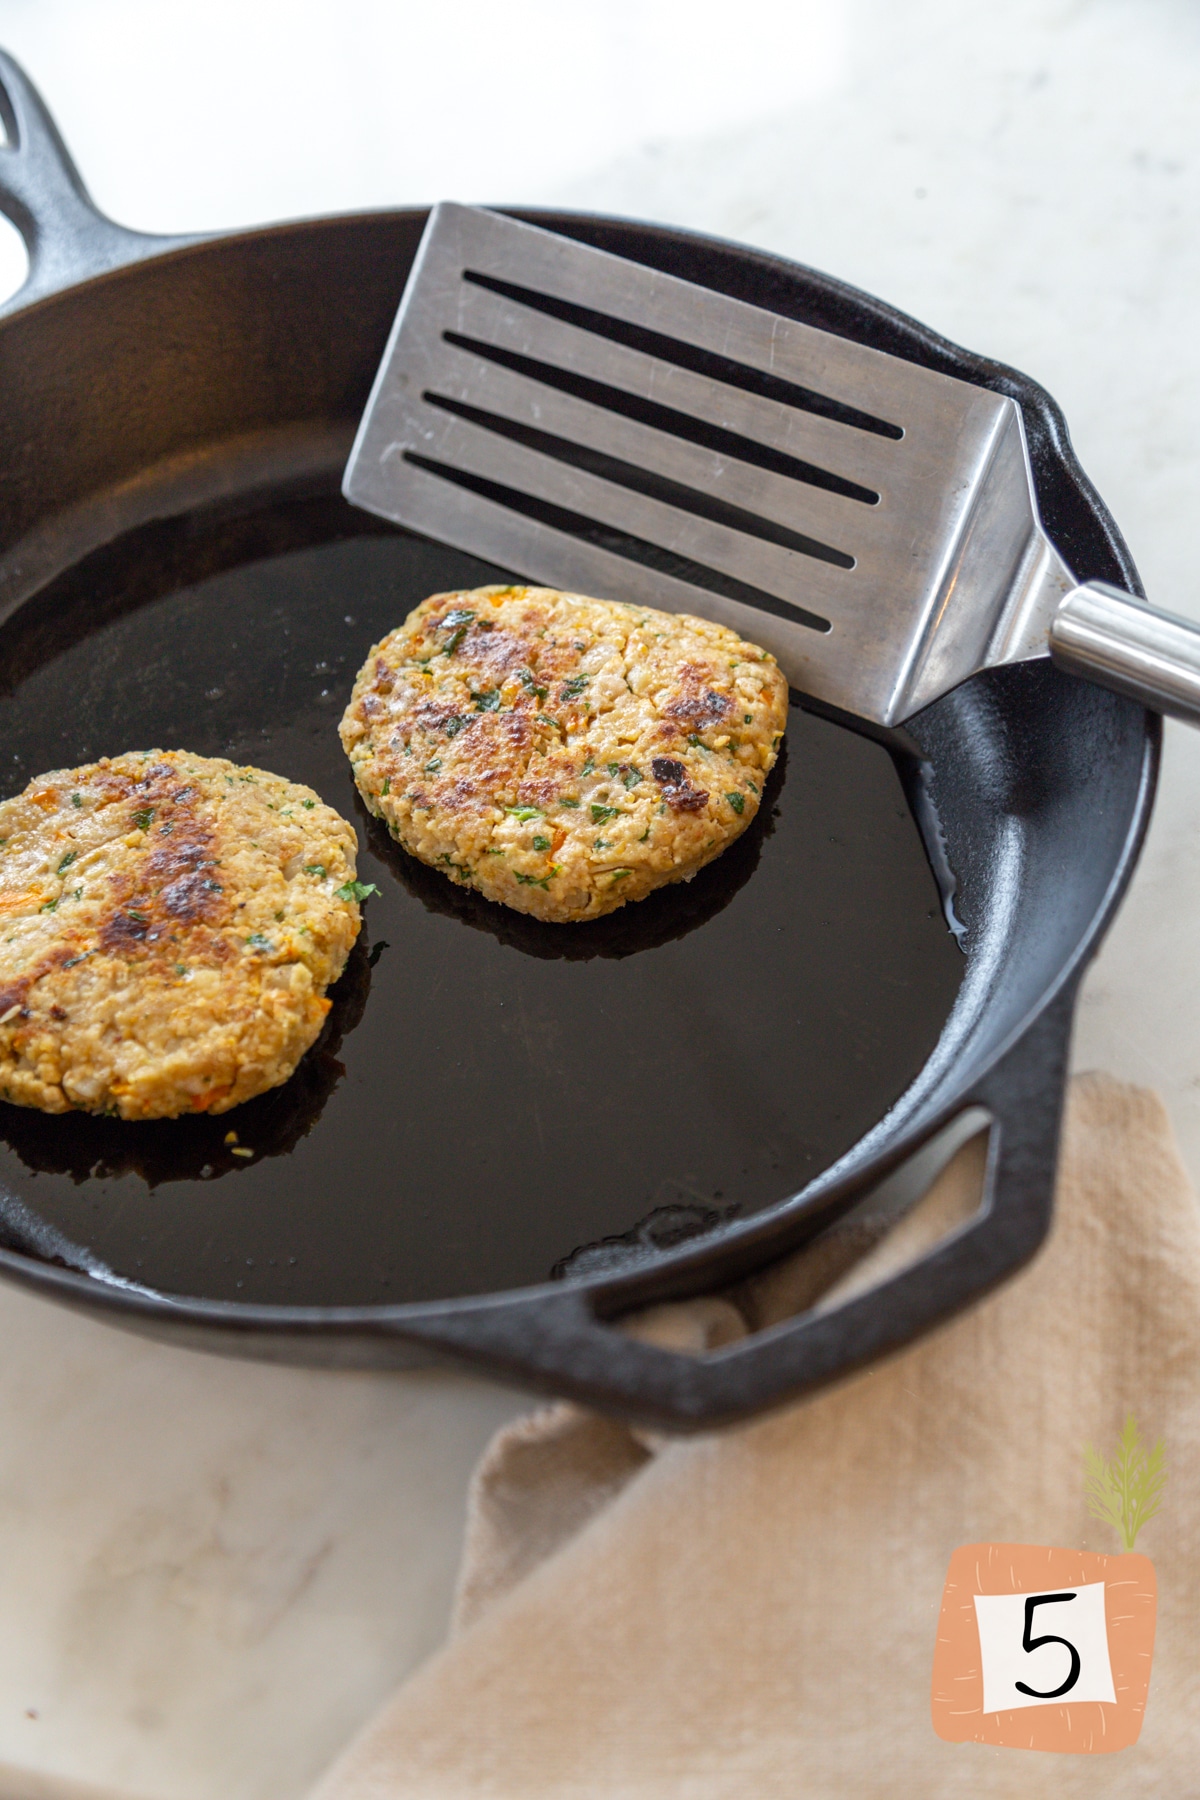 Cooked chickpea burgers in a frying pan.